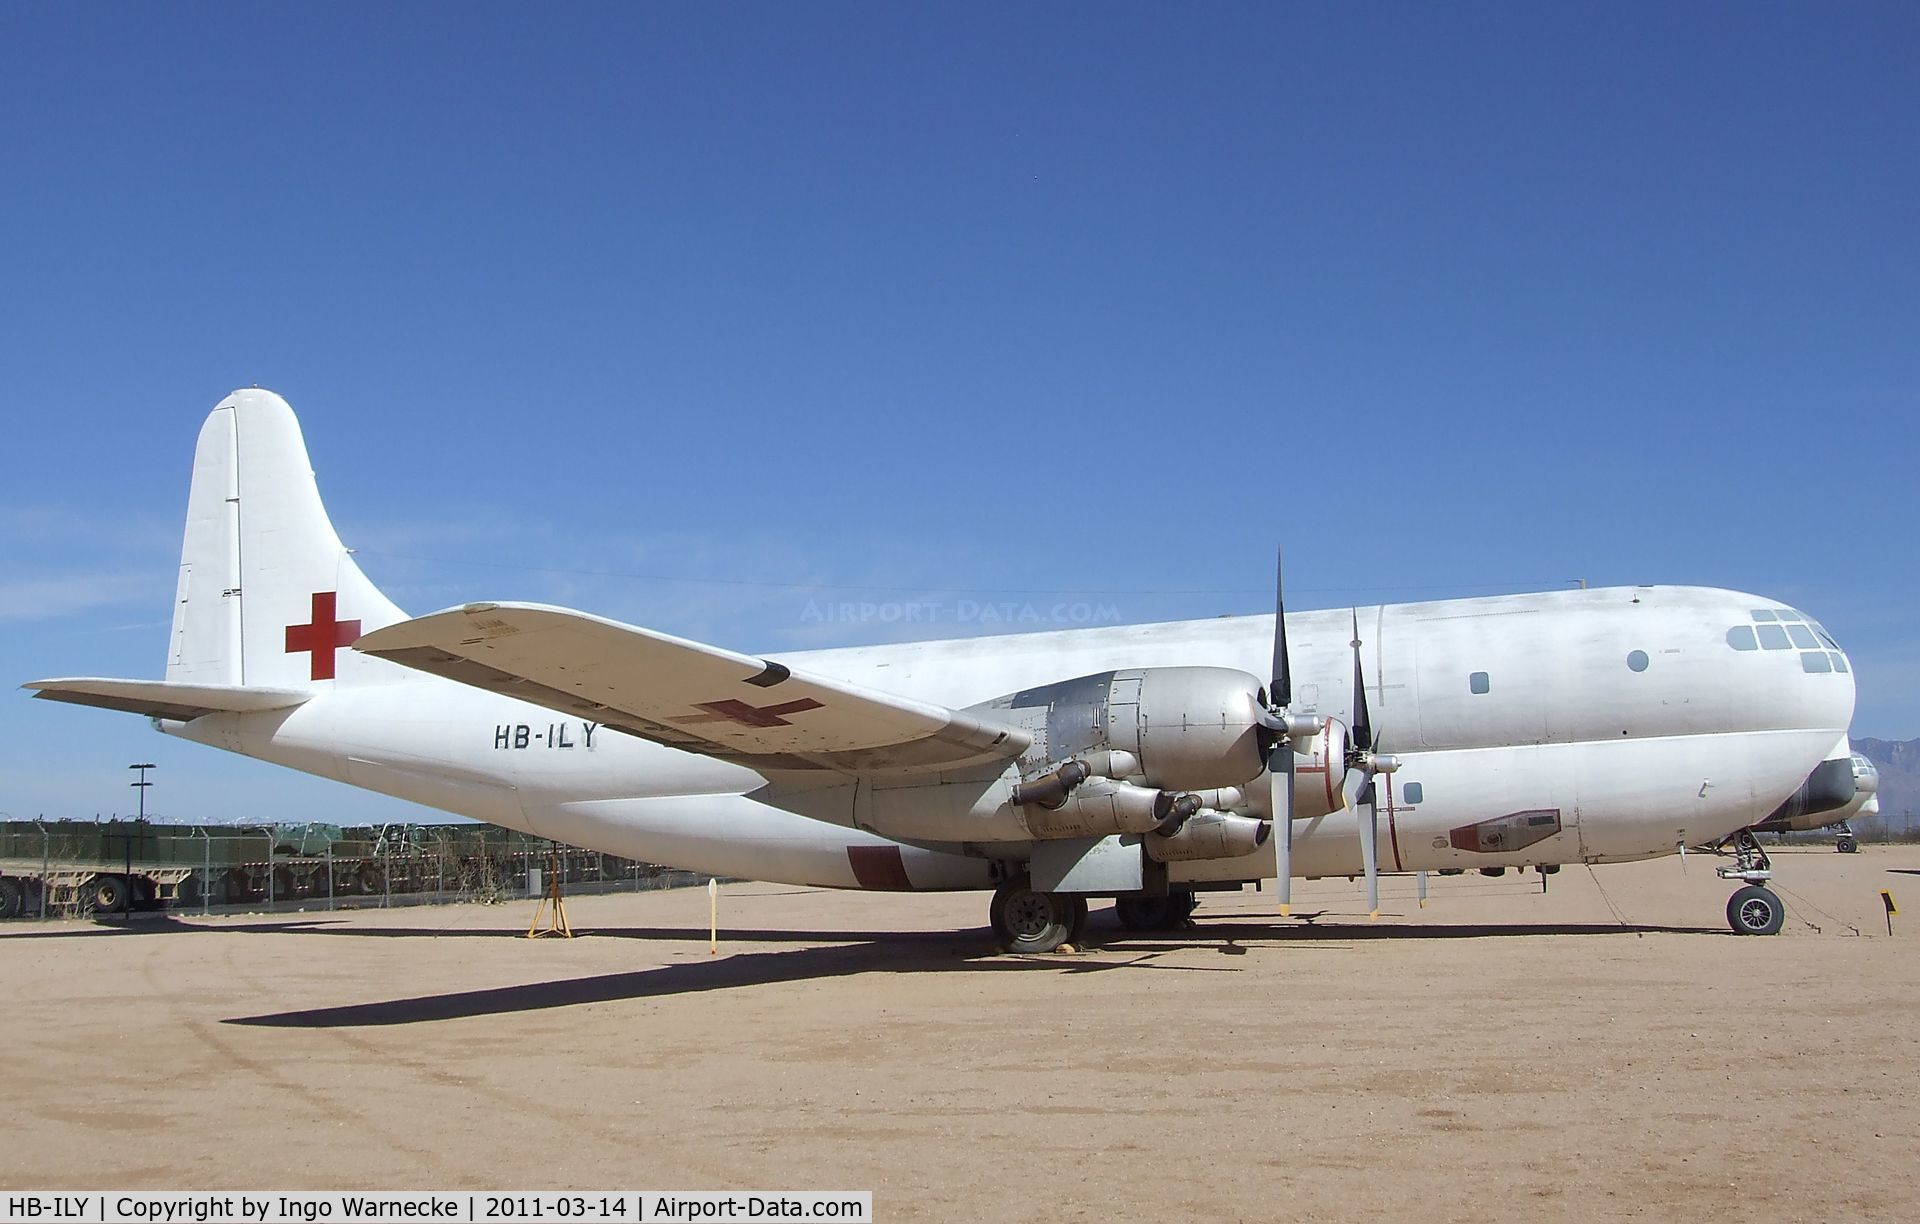 HB-ILY, 1969 Boeing C-97G Stratofreighter C/N 16657, Boeing C-97G Stratofreighter at the Pima Air & Space Museum, Tucson AZ